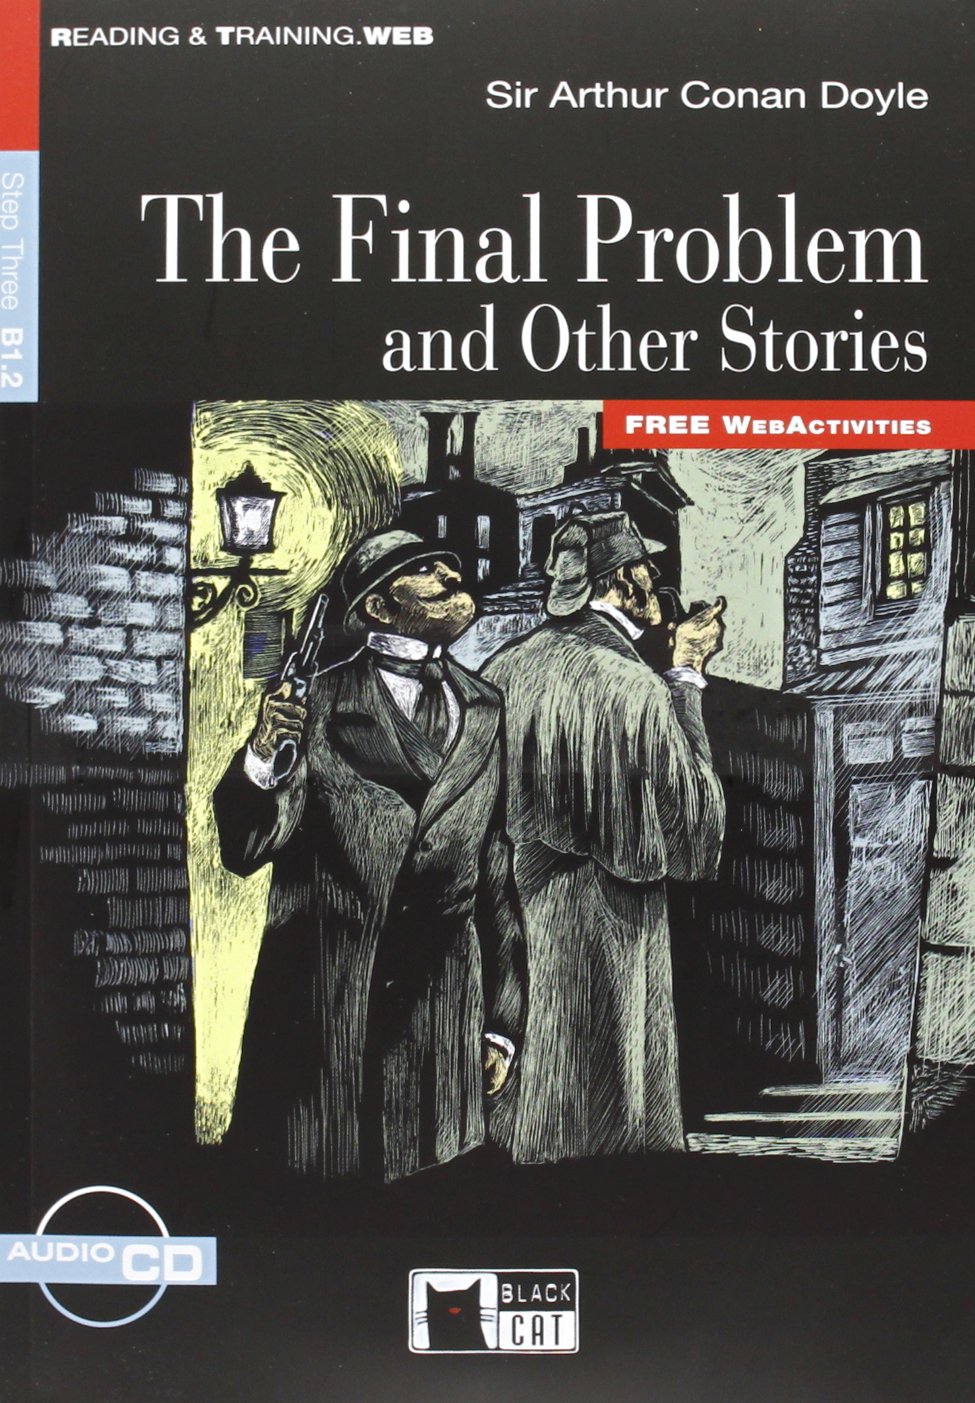 Reading & Training: The Final Problem and Other Stories + Audio CD | 